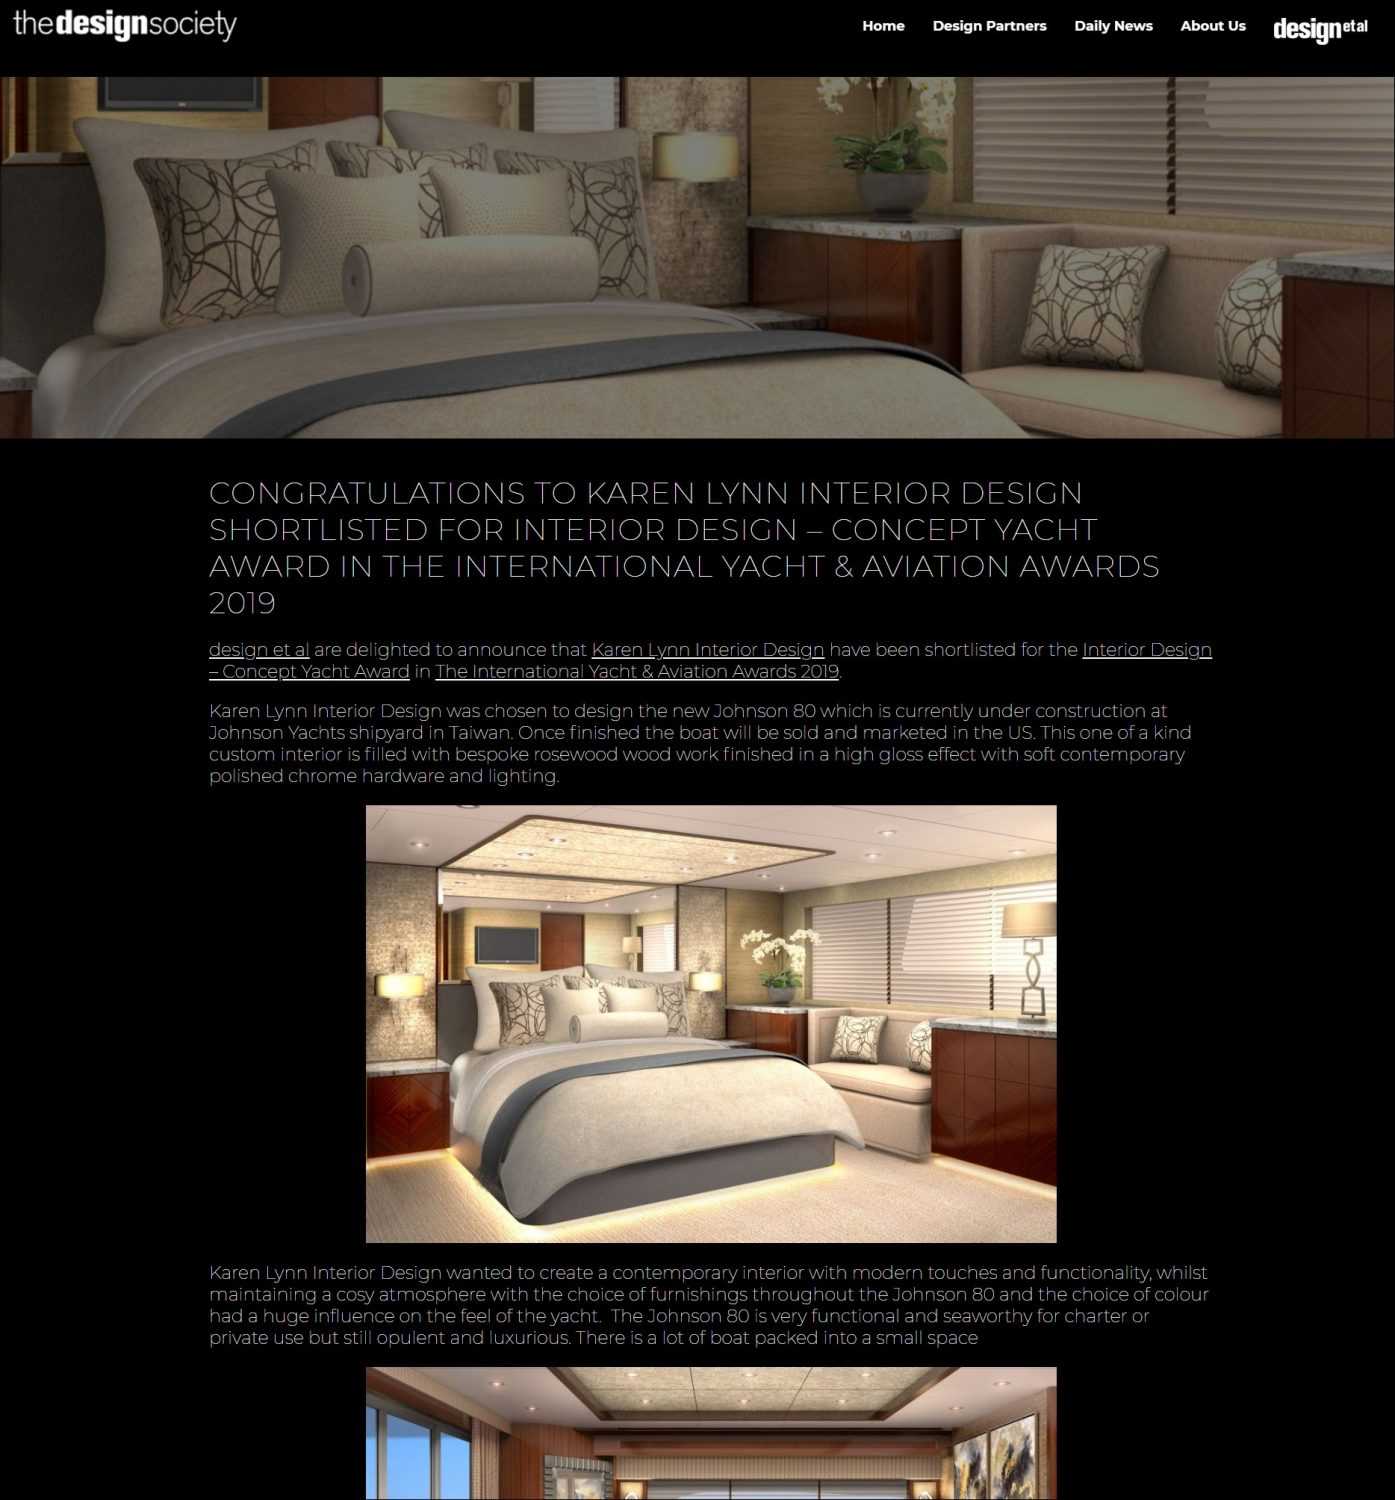 2019 Article Design etal2 - Karen Lynn Interiors - Interior Design for Yacht, Aircrafts and Residential Projects